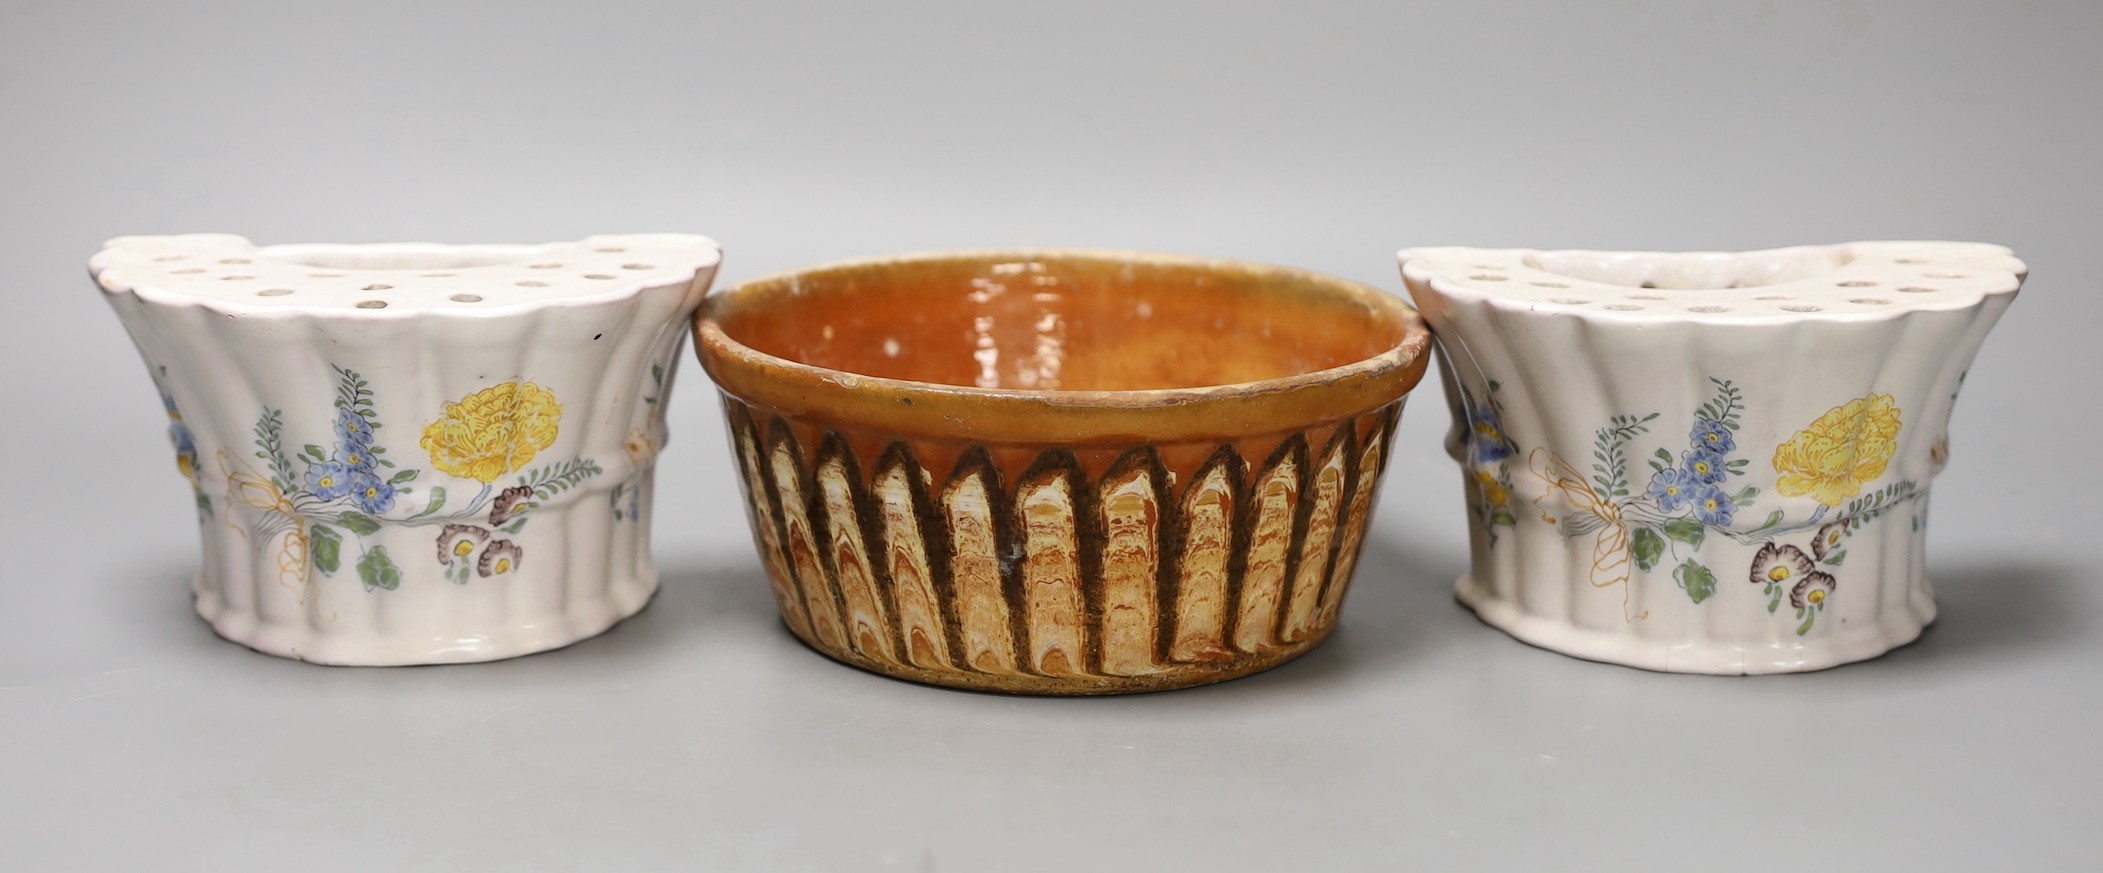 A Slipware conical bowl, 18th / 19th century, flaking to decoration, 19cm diameter, together with a pair of German faience flower decorated bough pots, late 18th century, 15.5cm wide